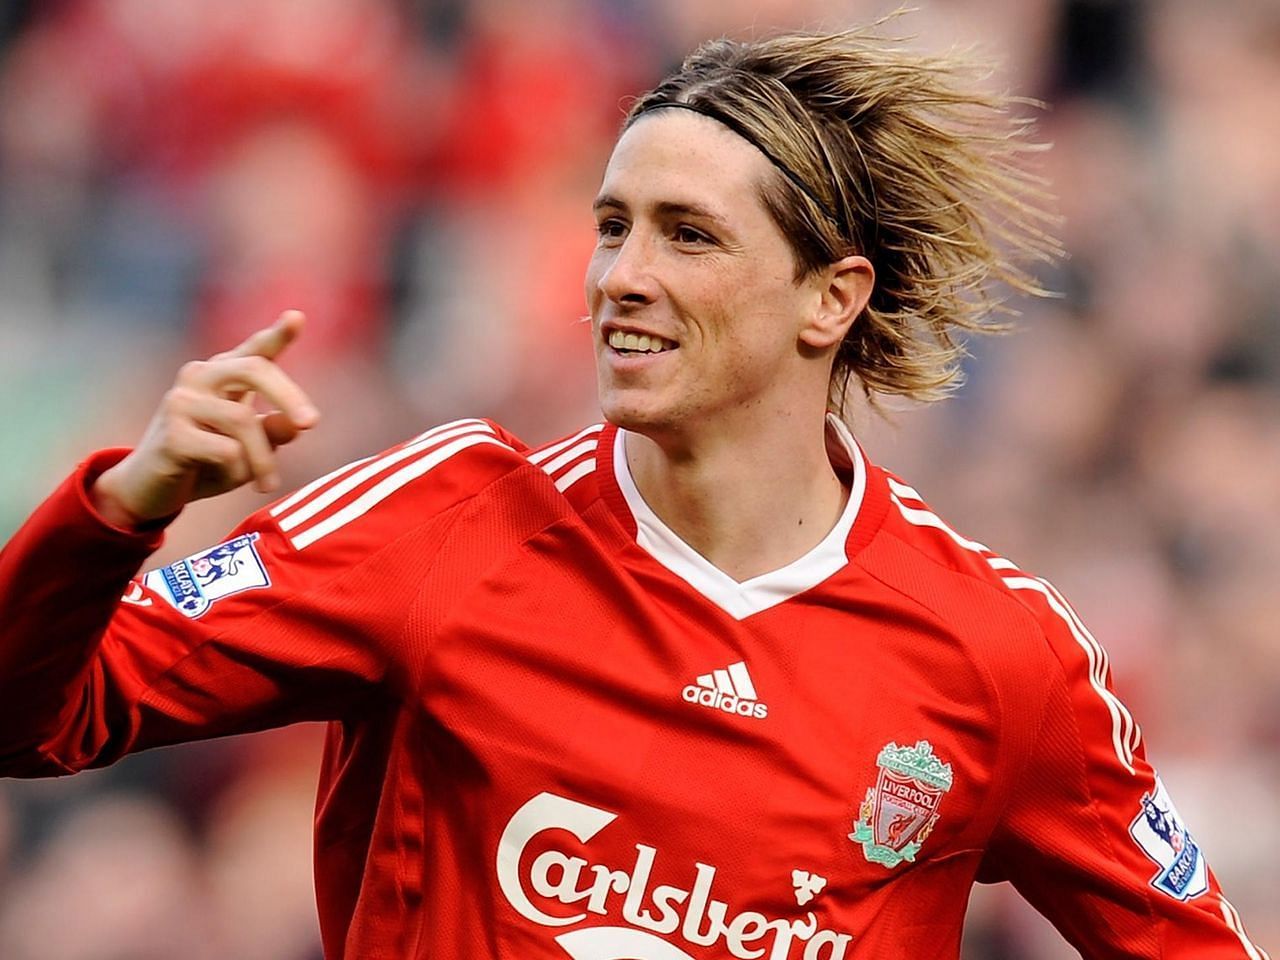 El Nino was one of the most lethal strikers at Liverpool